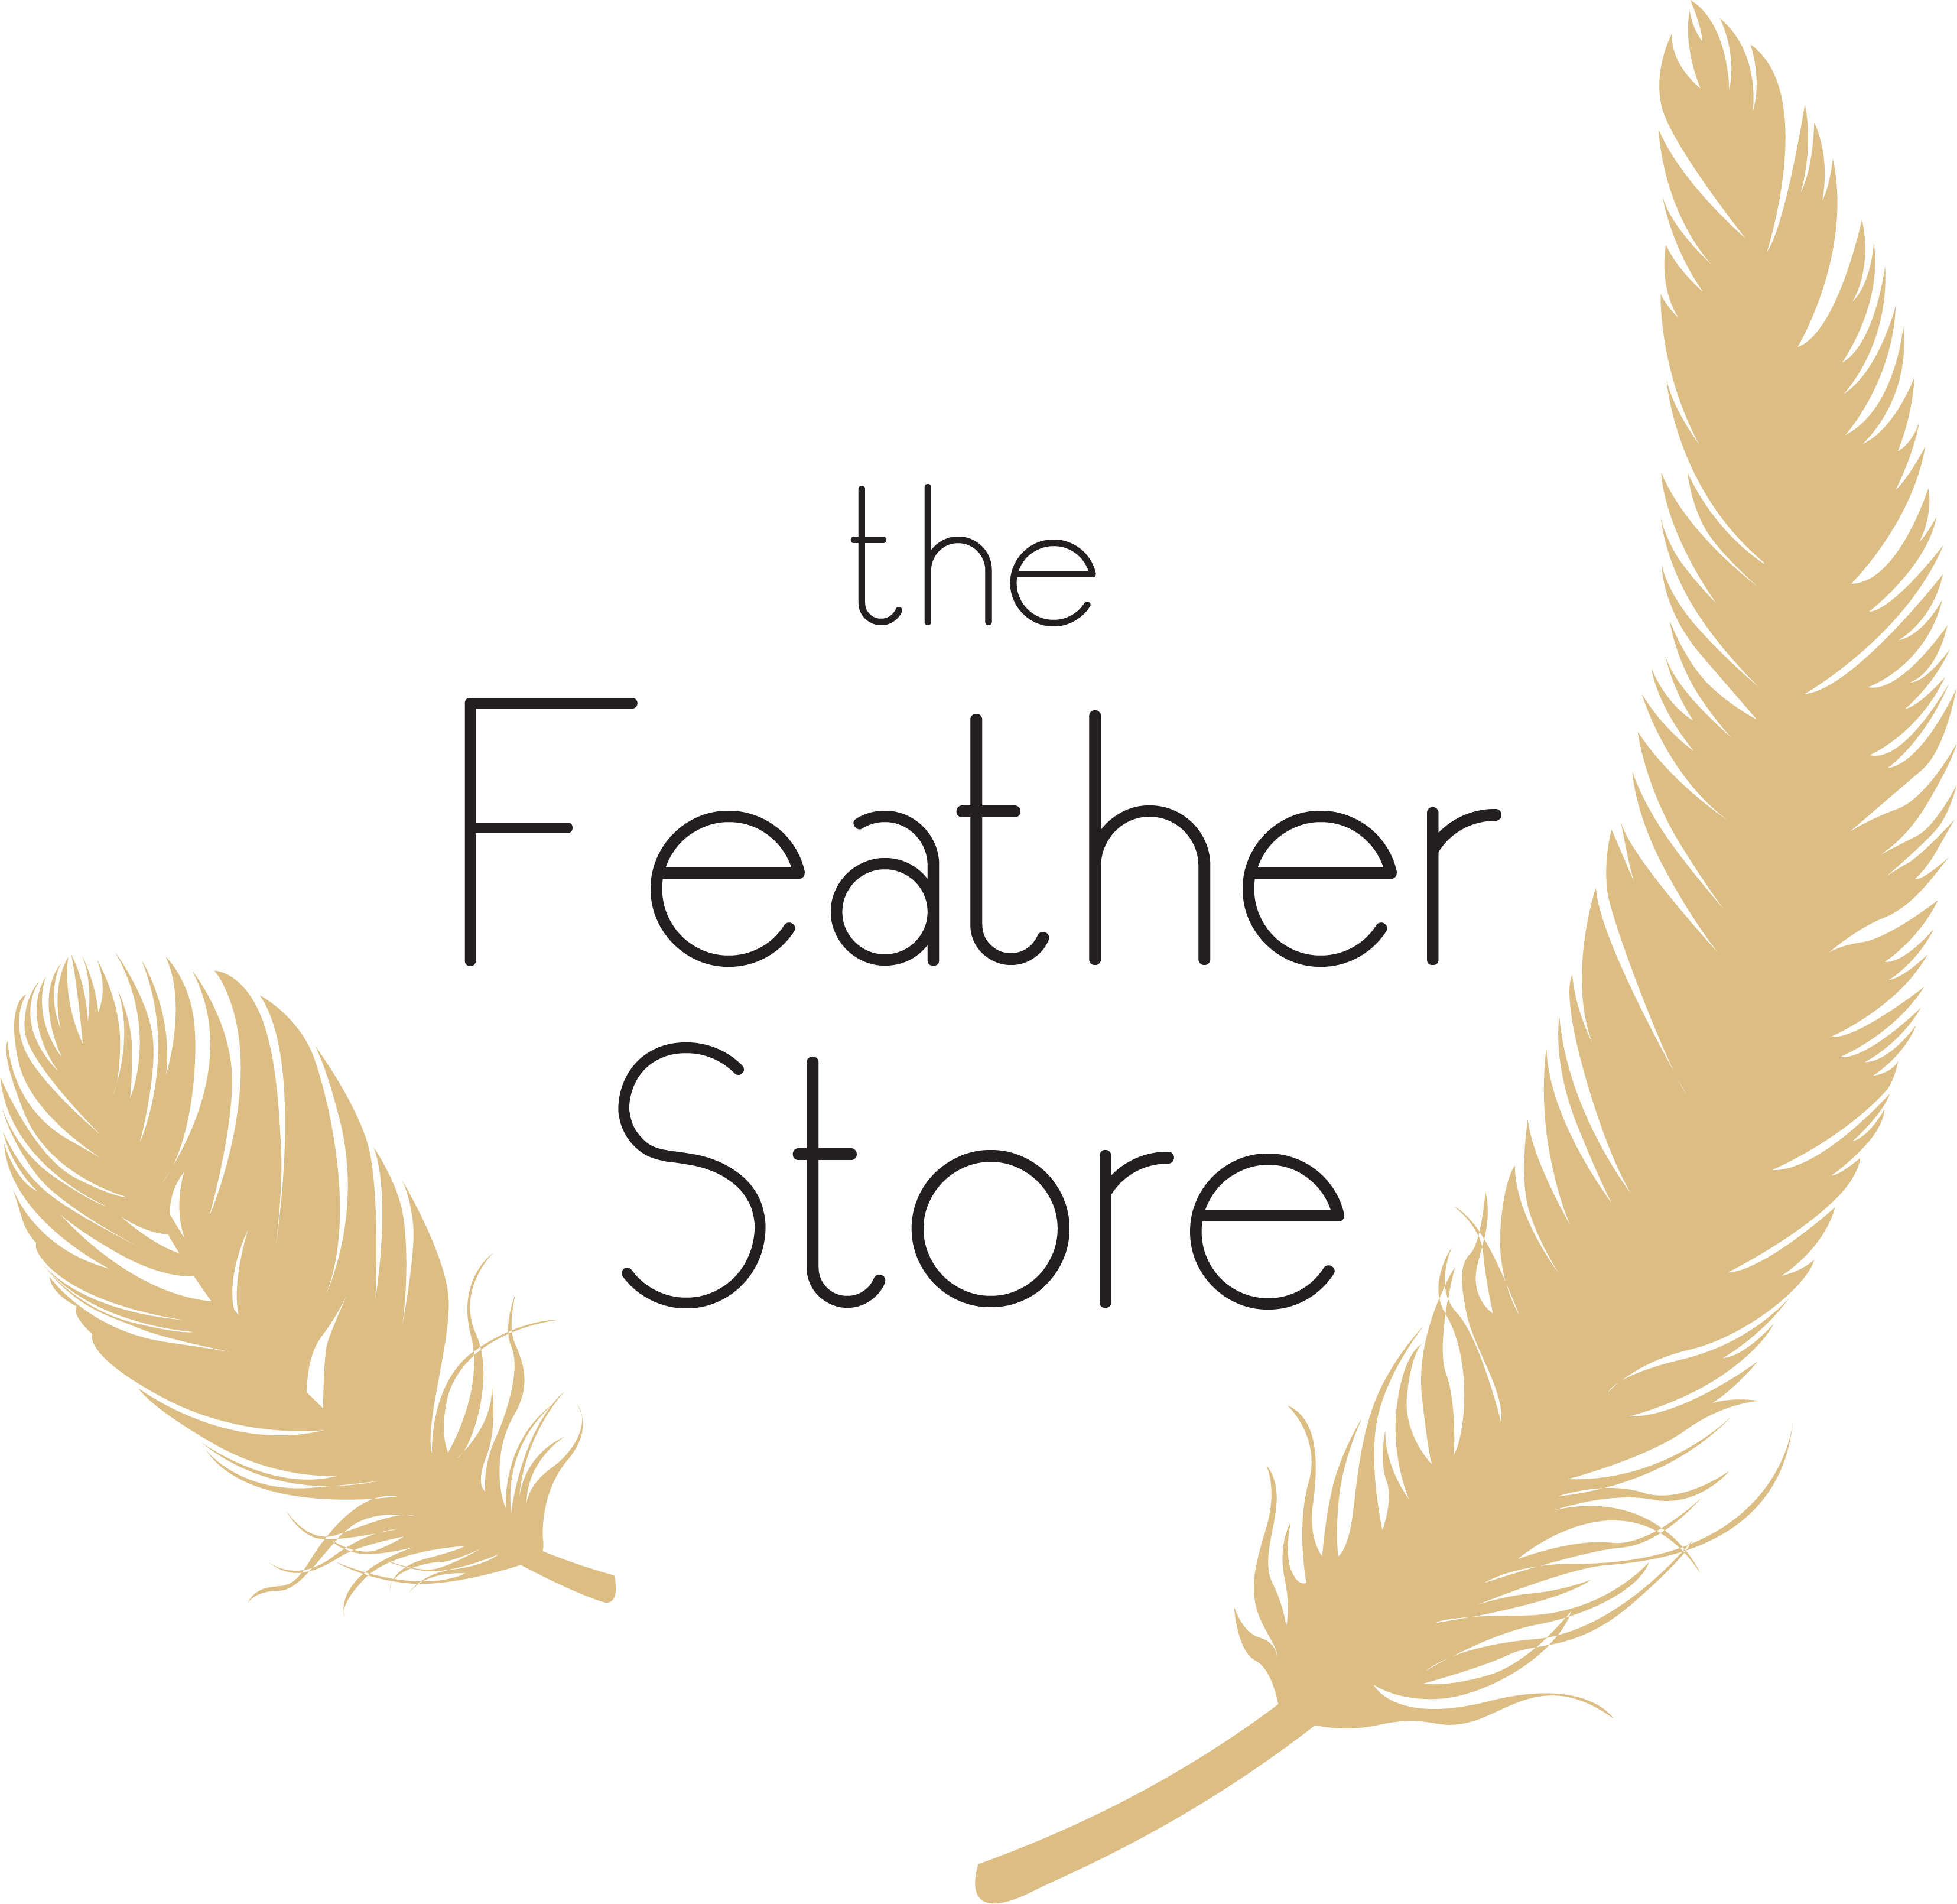 The Feather Store